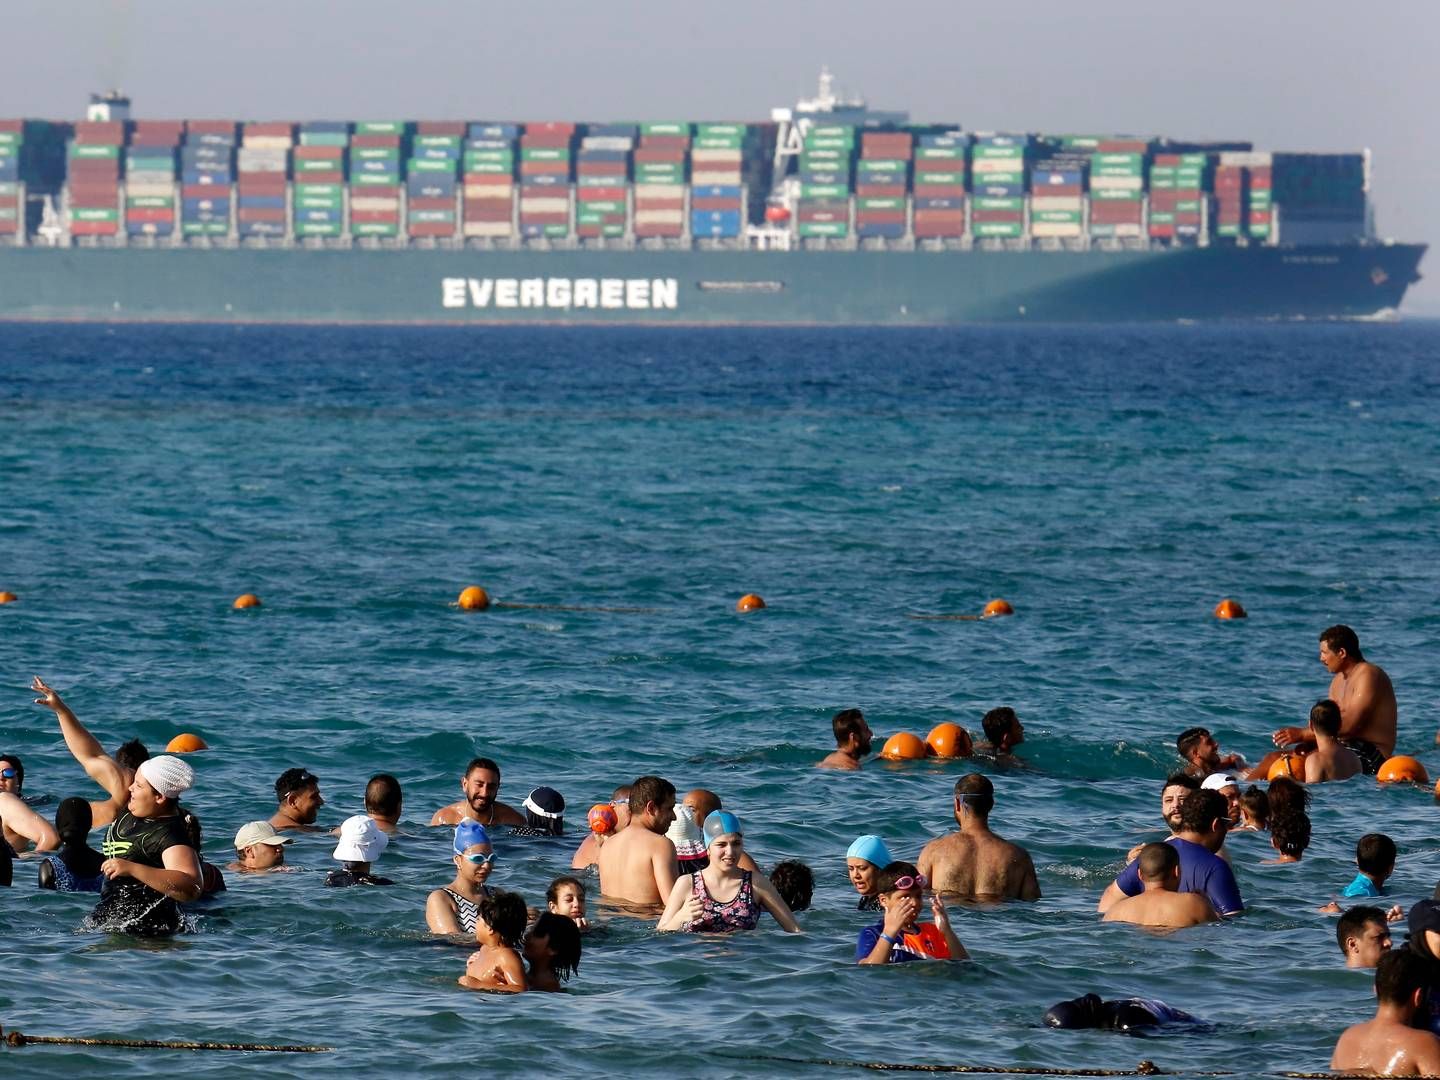 The capacity of the container fleet has decreased significantly since the first shipping lines rerouted south of Africa. | Photo: Amr Nabil/AP/Ritzau Scanpix